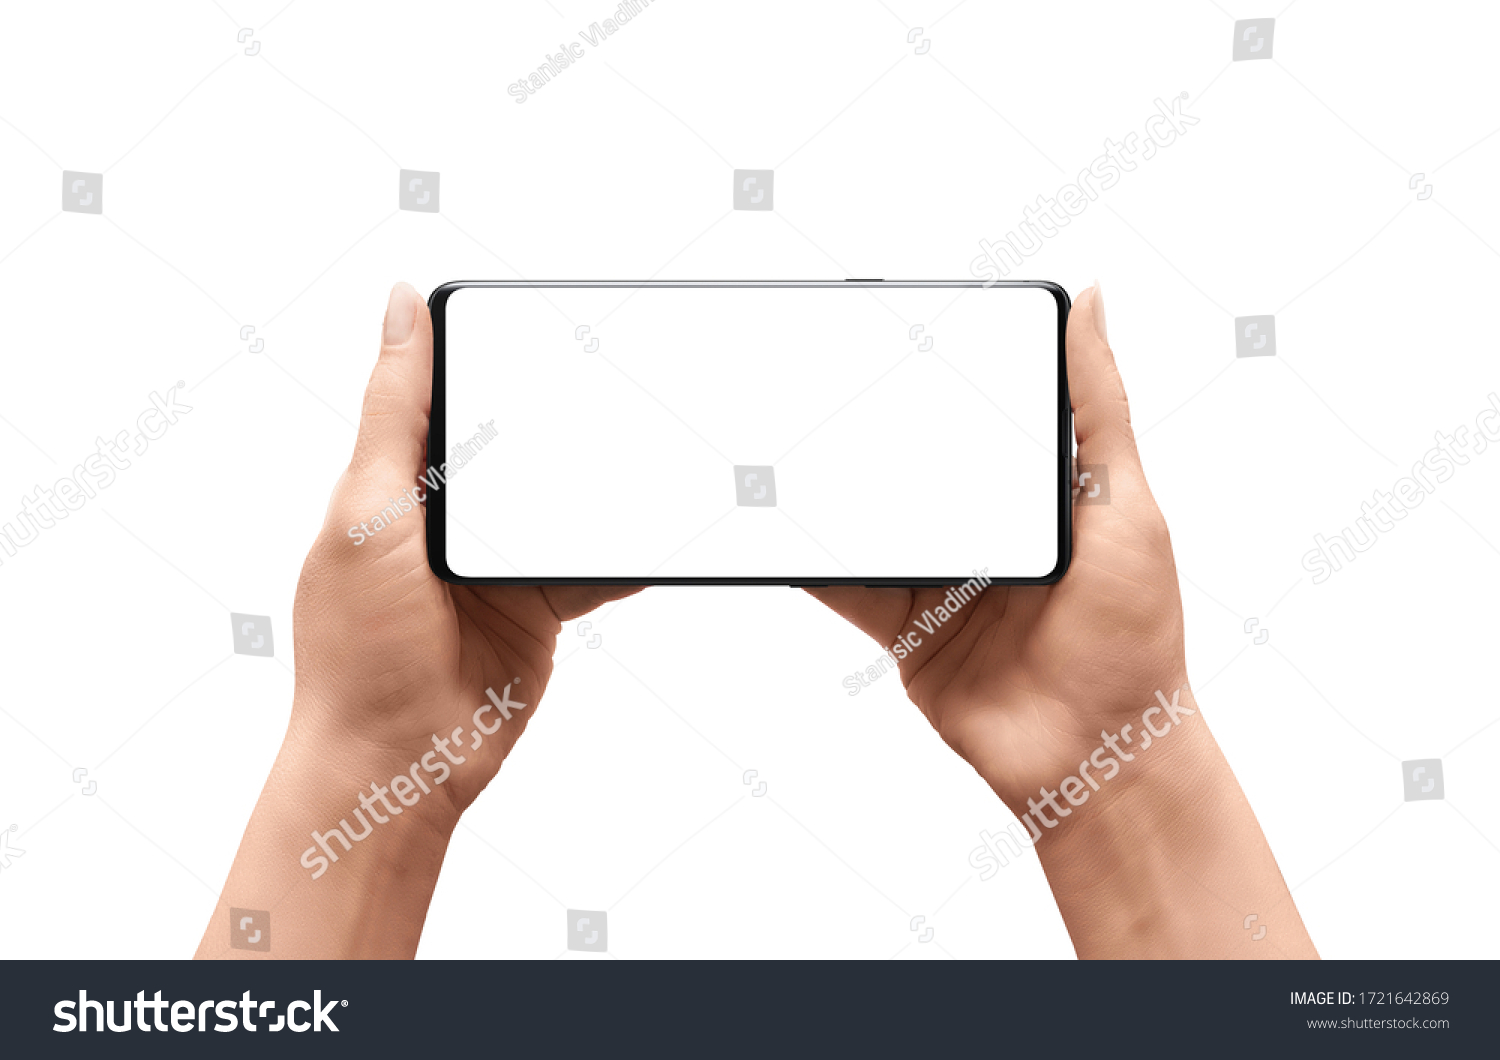 Isolated phone mockup in woman hands. Horizontal position. Isolated display and background #1721642869